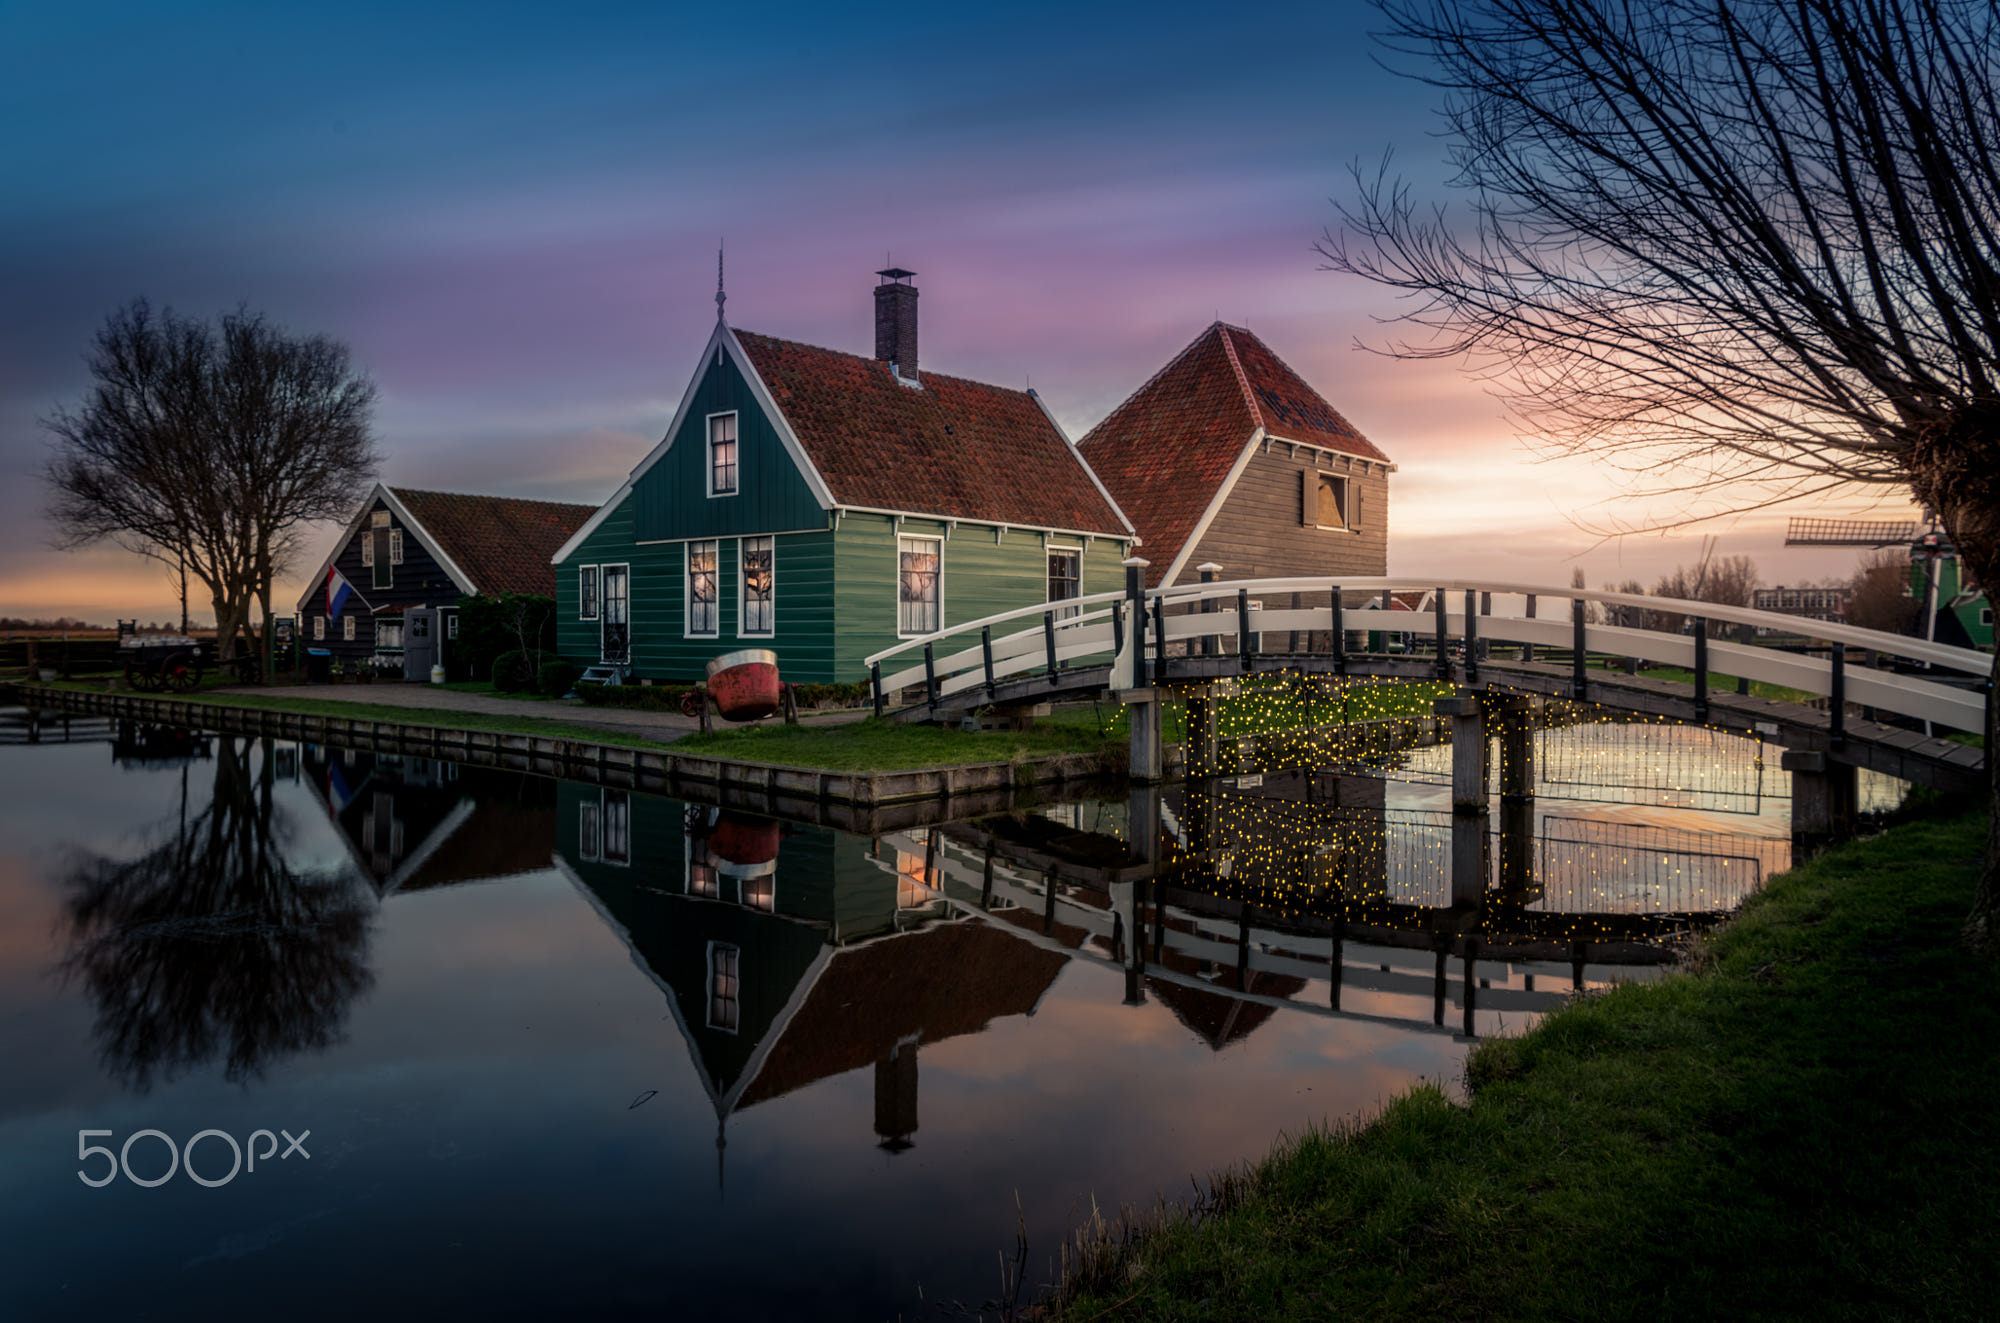 Photography Reflection River House Sunset Rural 500px Water Clouds 2000x1323